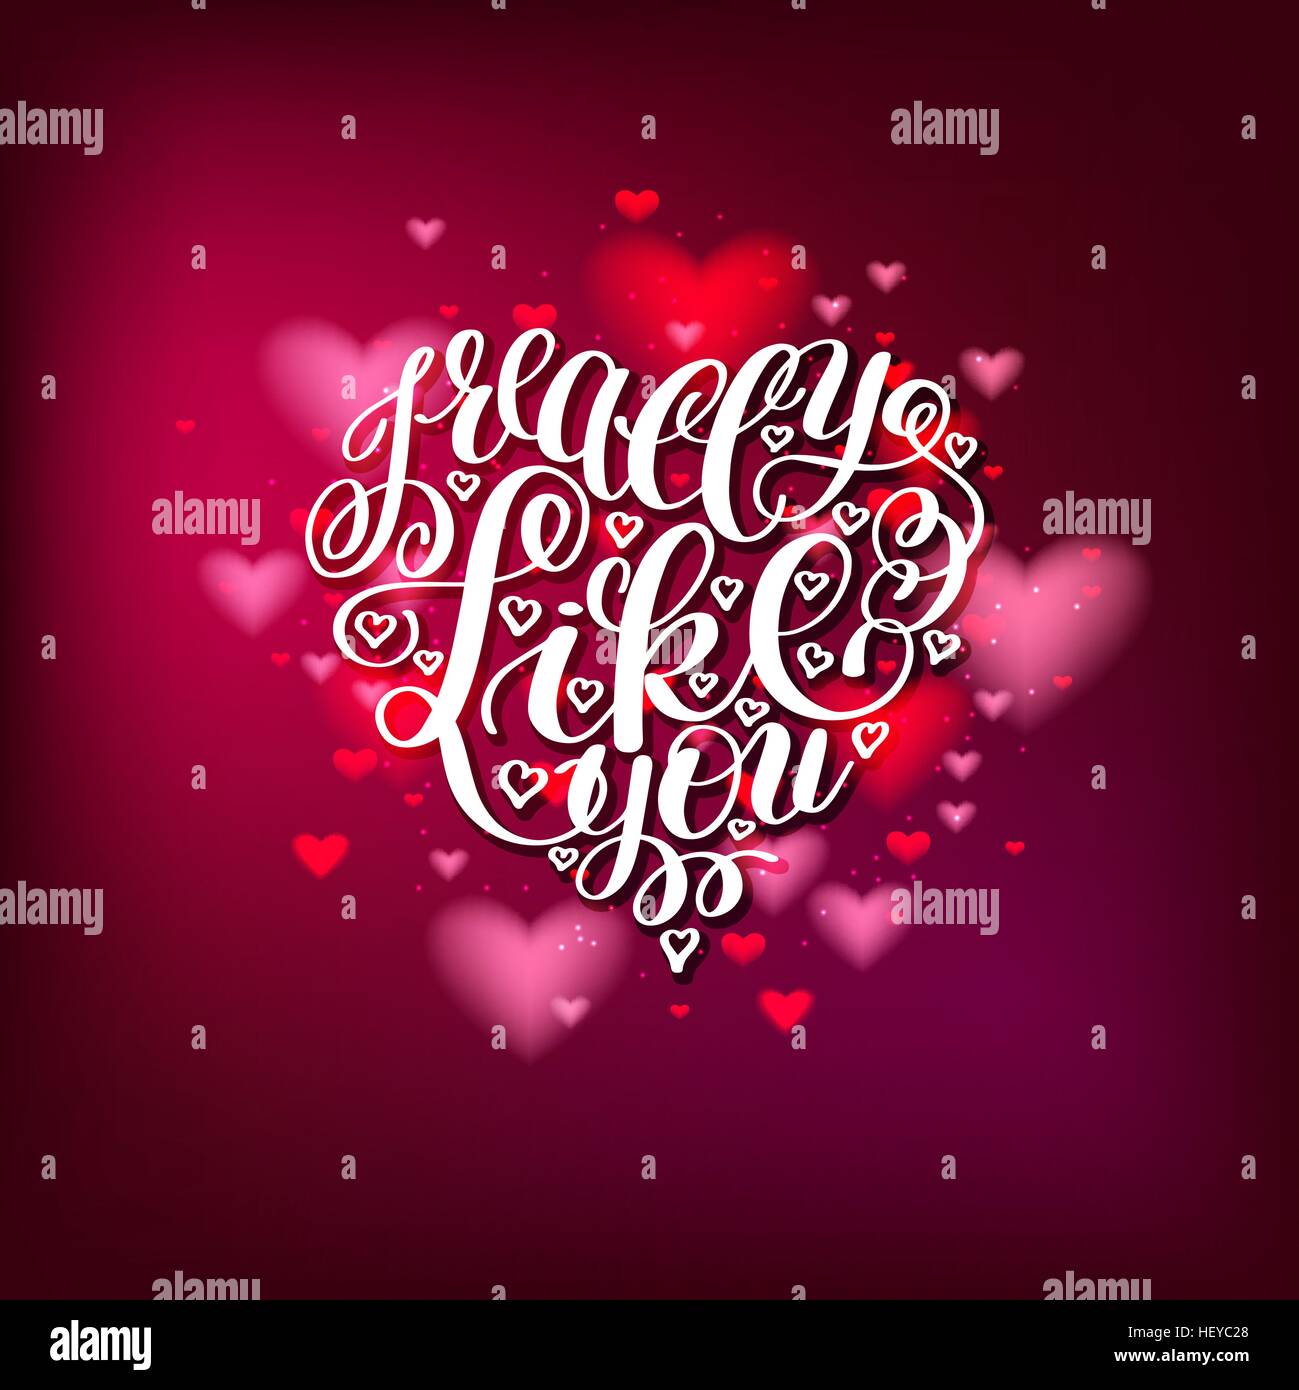 I Really Like You. Love Letter on Heart Shape, Text English Hand Stock Vector